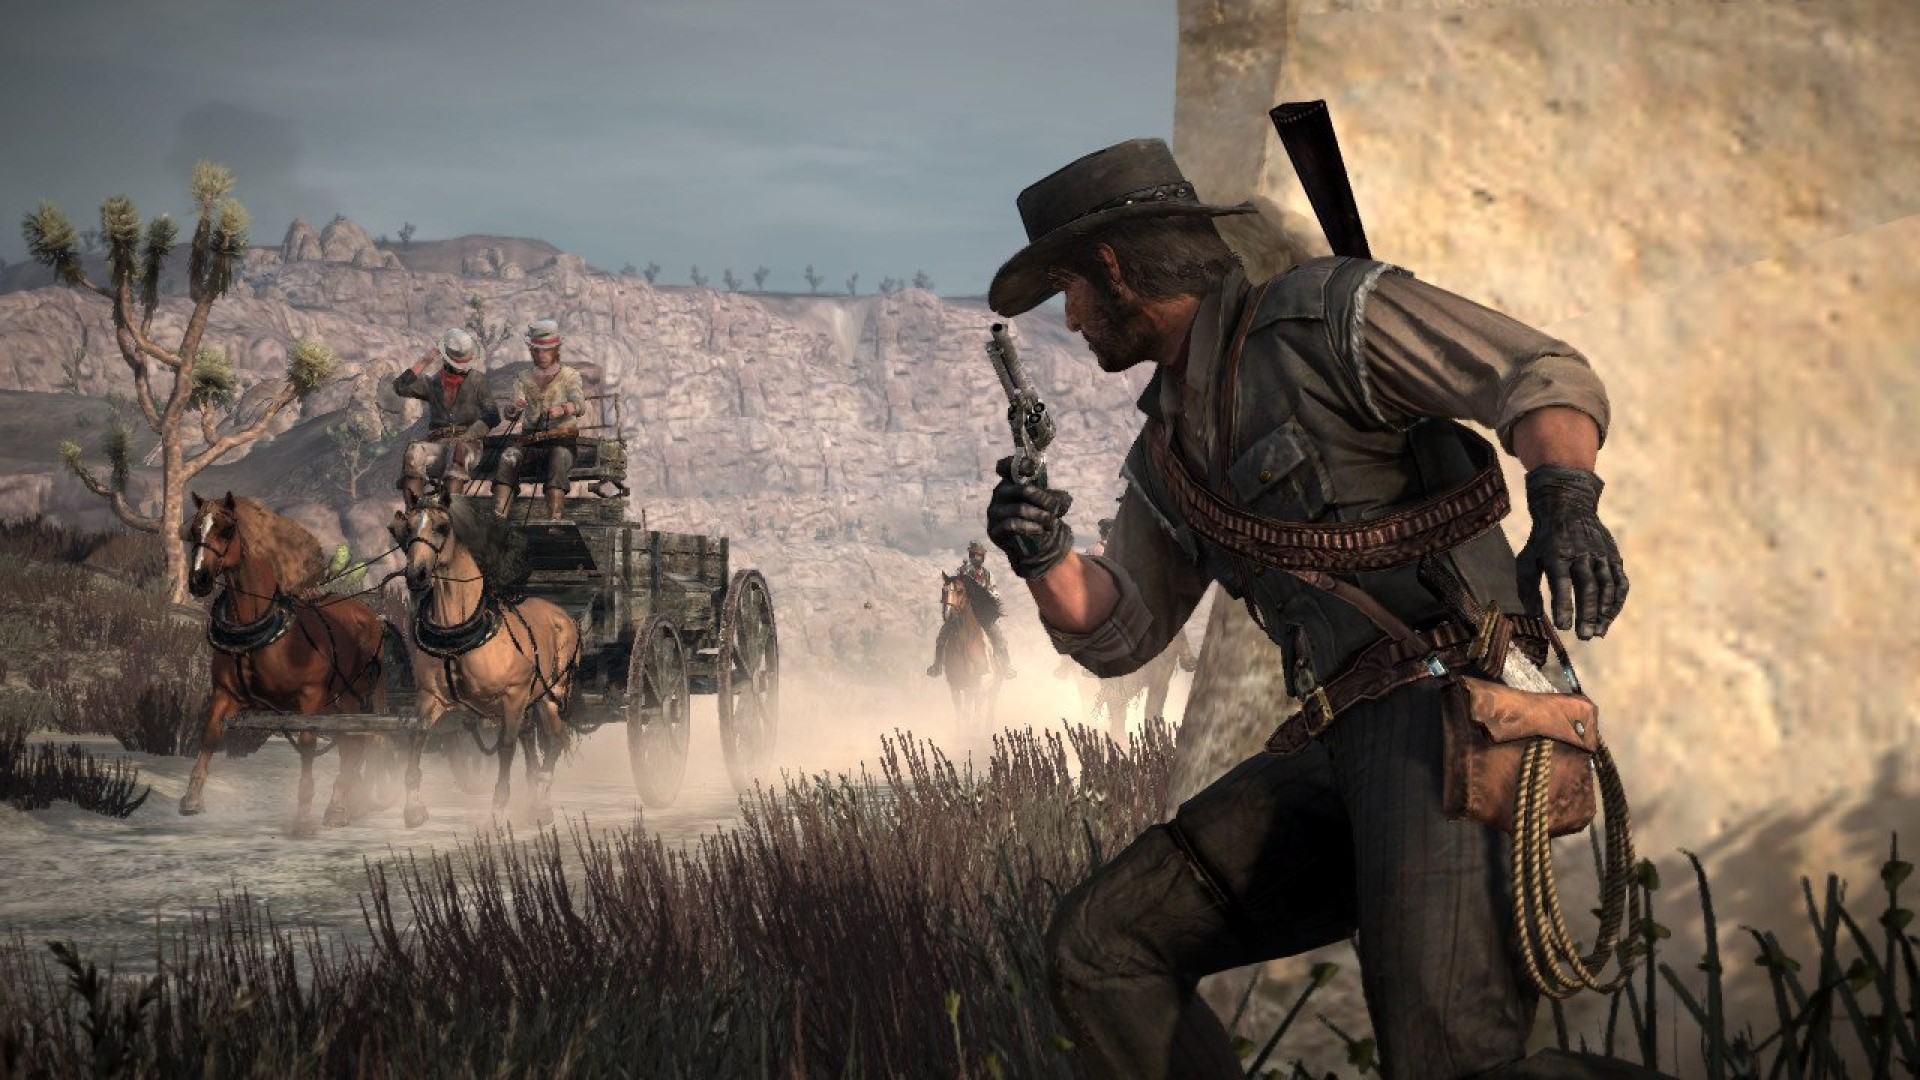 Red Dead Redemption (Rockstar Presents Ver) Reference Reportedly Discovered – Rumor